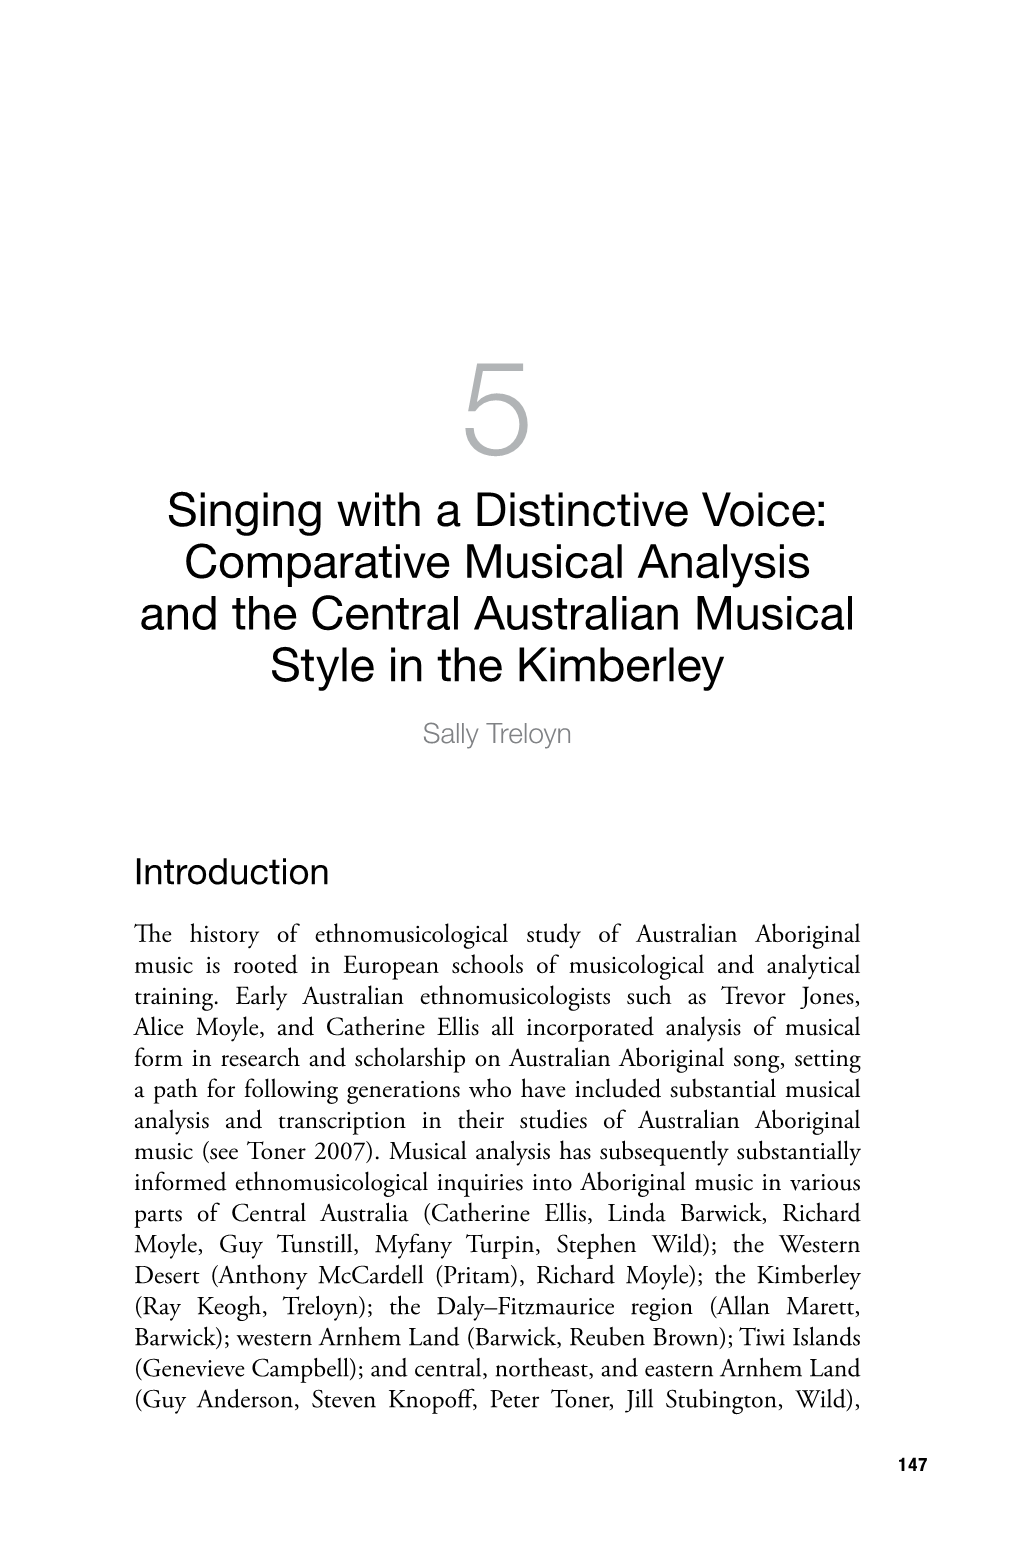 Singing with a Distinctive Voice: Comparative Musical Analysis and the Central Australian Musical Style in the Kimberley Sally Treloyn